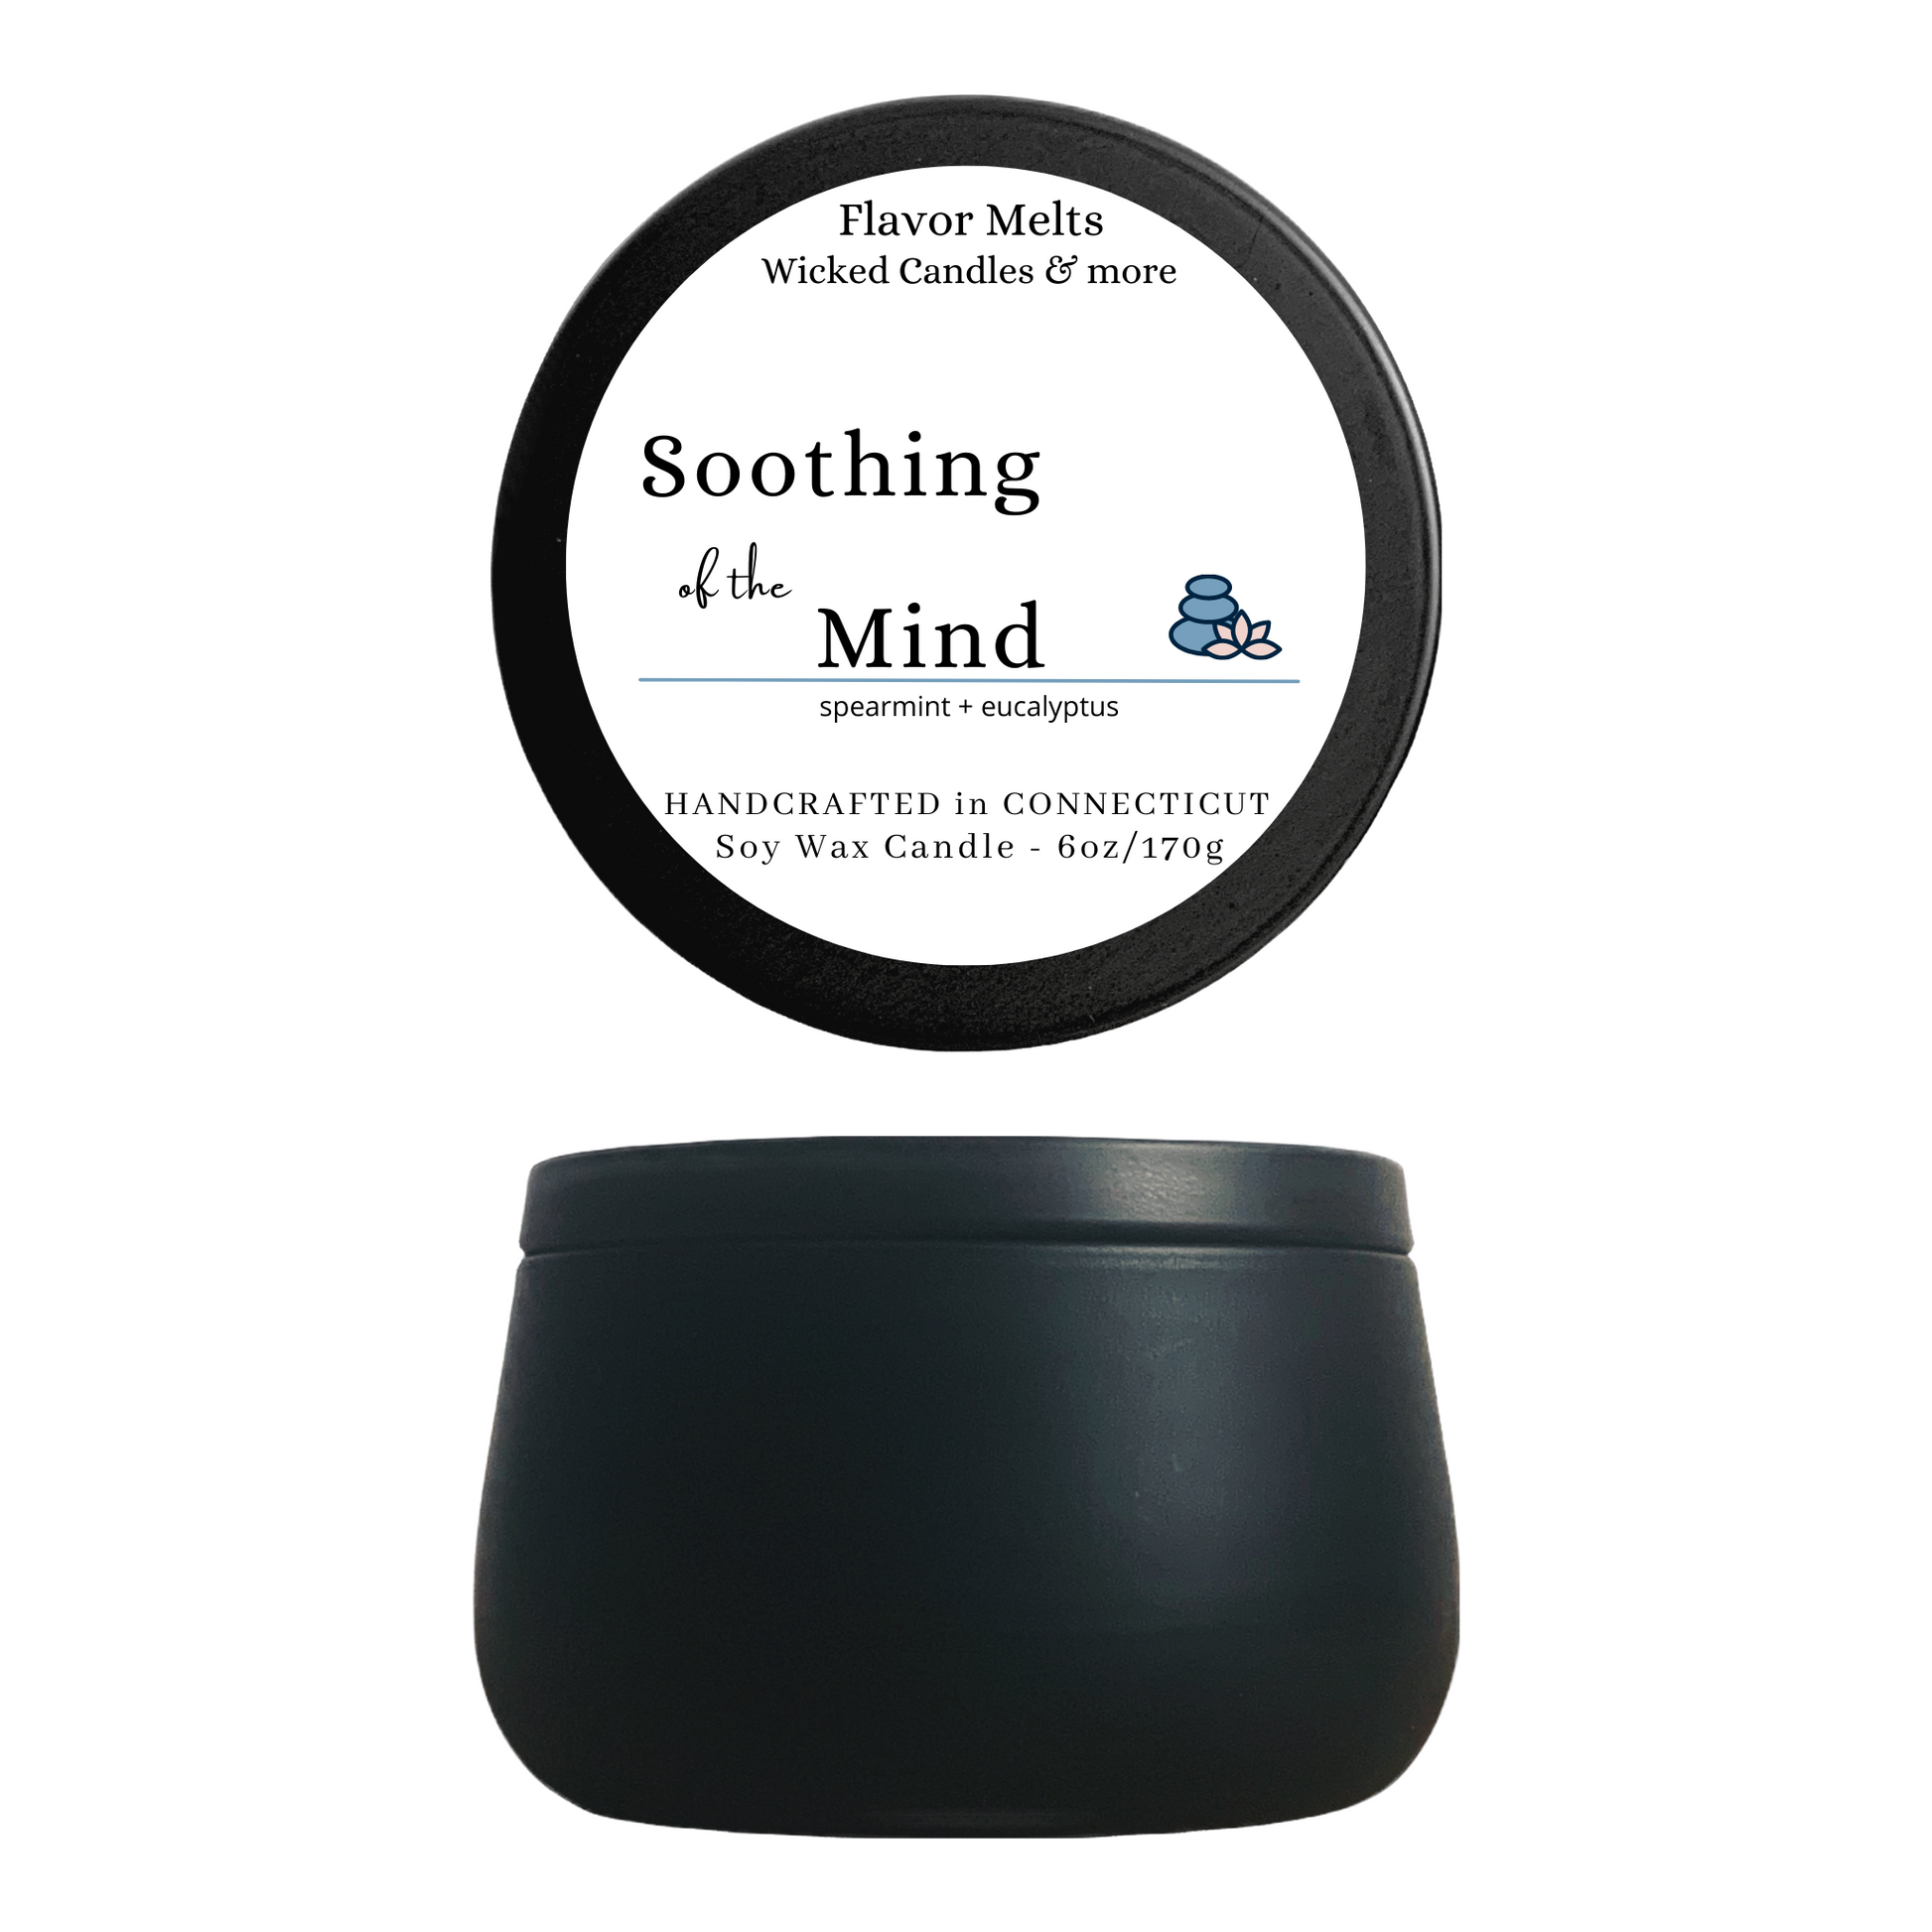 soothing of the mind woodwick candle